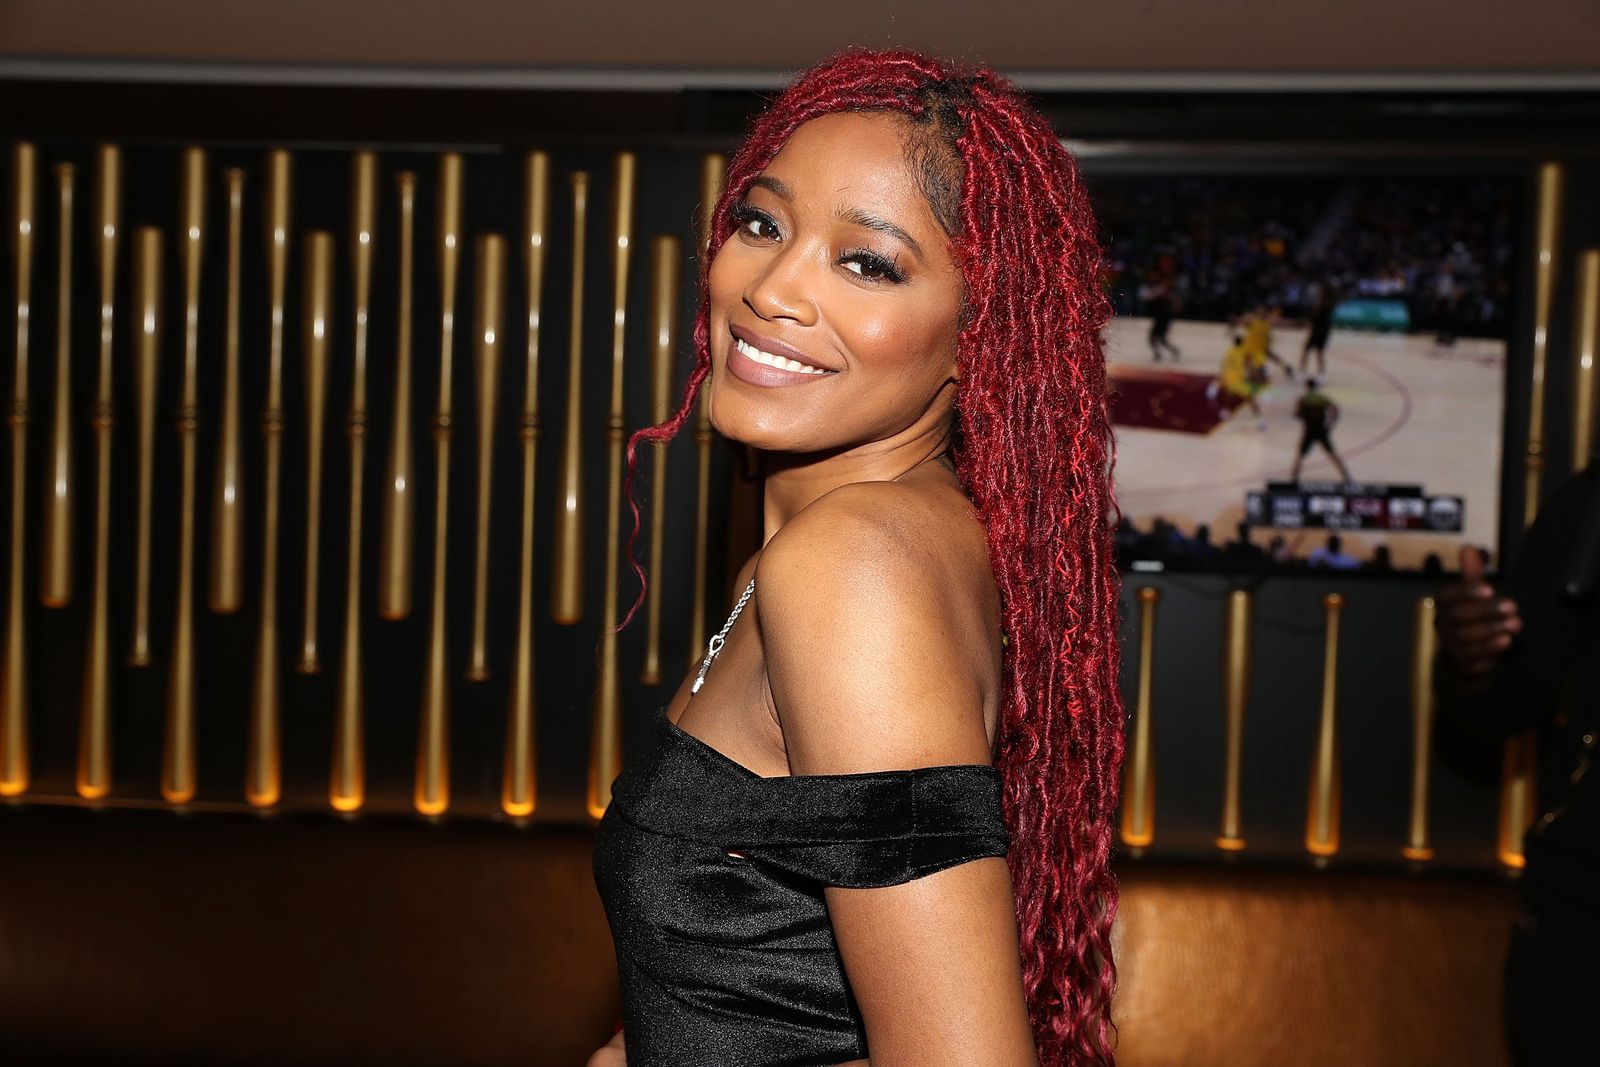 Keke Palmer attends her listening party at the 40/40 club in 2018 | Source: Getty Images